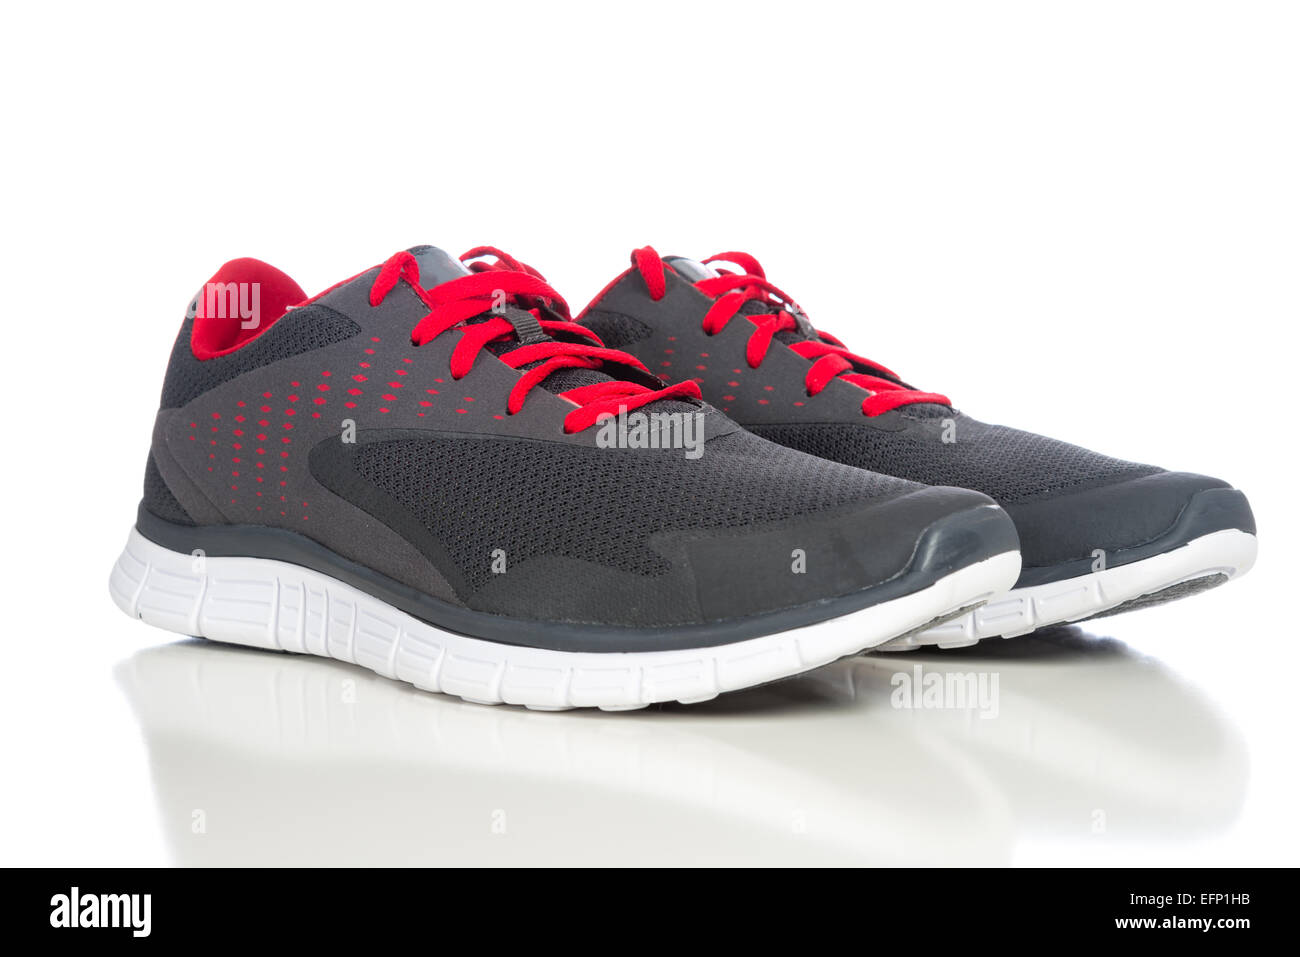 Gray athletic shoes with red shoe laces Stock Photo - Alamy